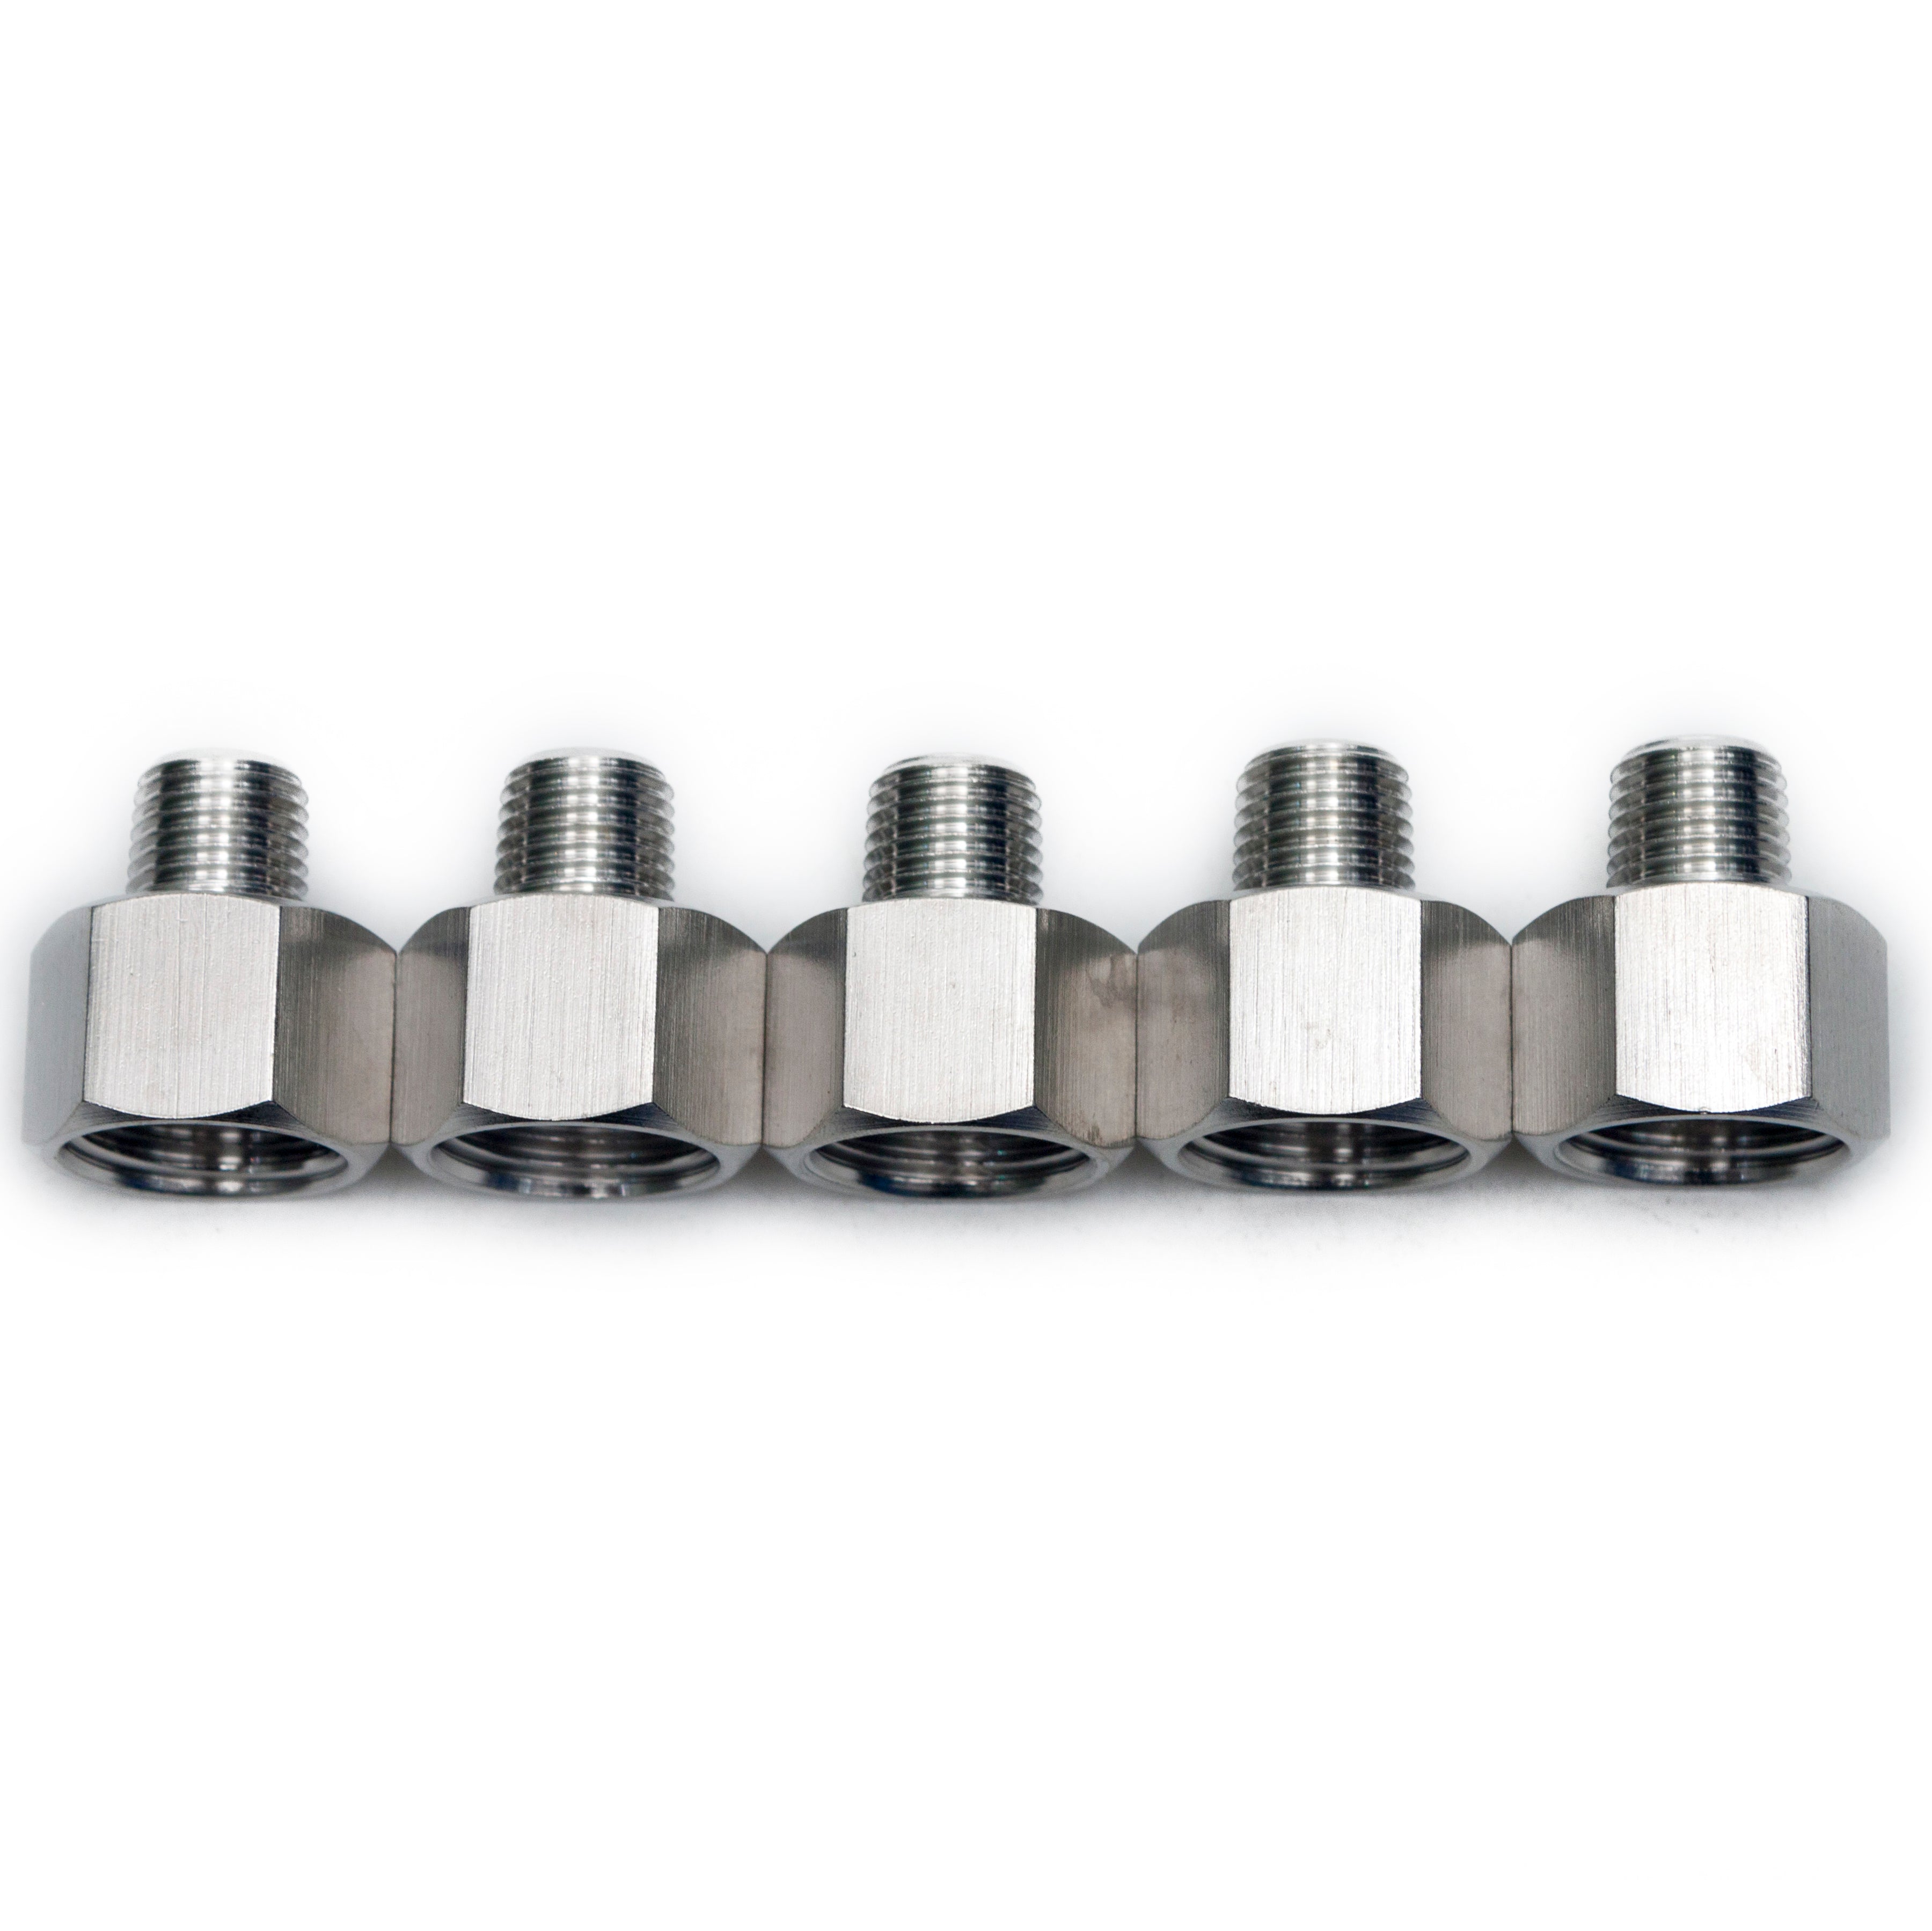 LTWFITTING Bar Production Stainless Steel 316 Pipe Fitting 1/2 Inch Female x 1/4 Inch Male NPT Adapter Air Fuel Water (Pack of 5)